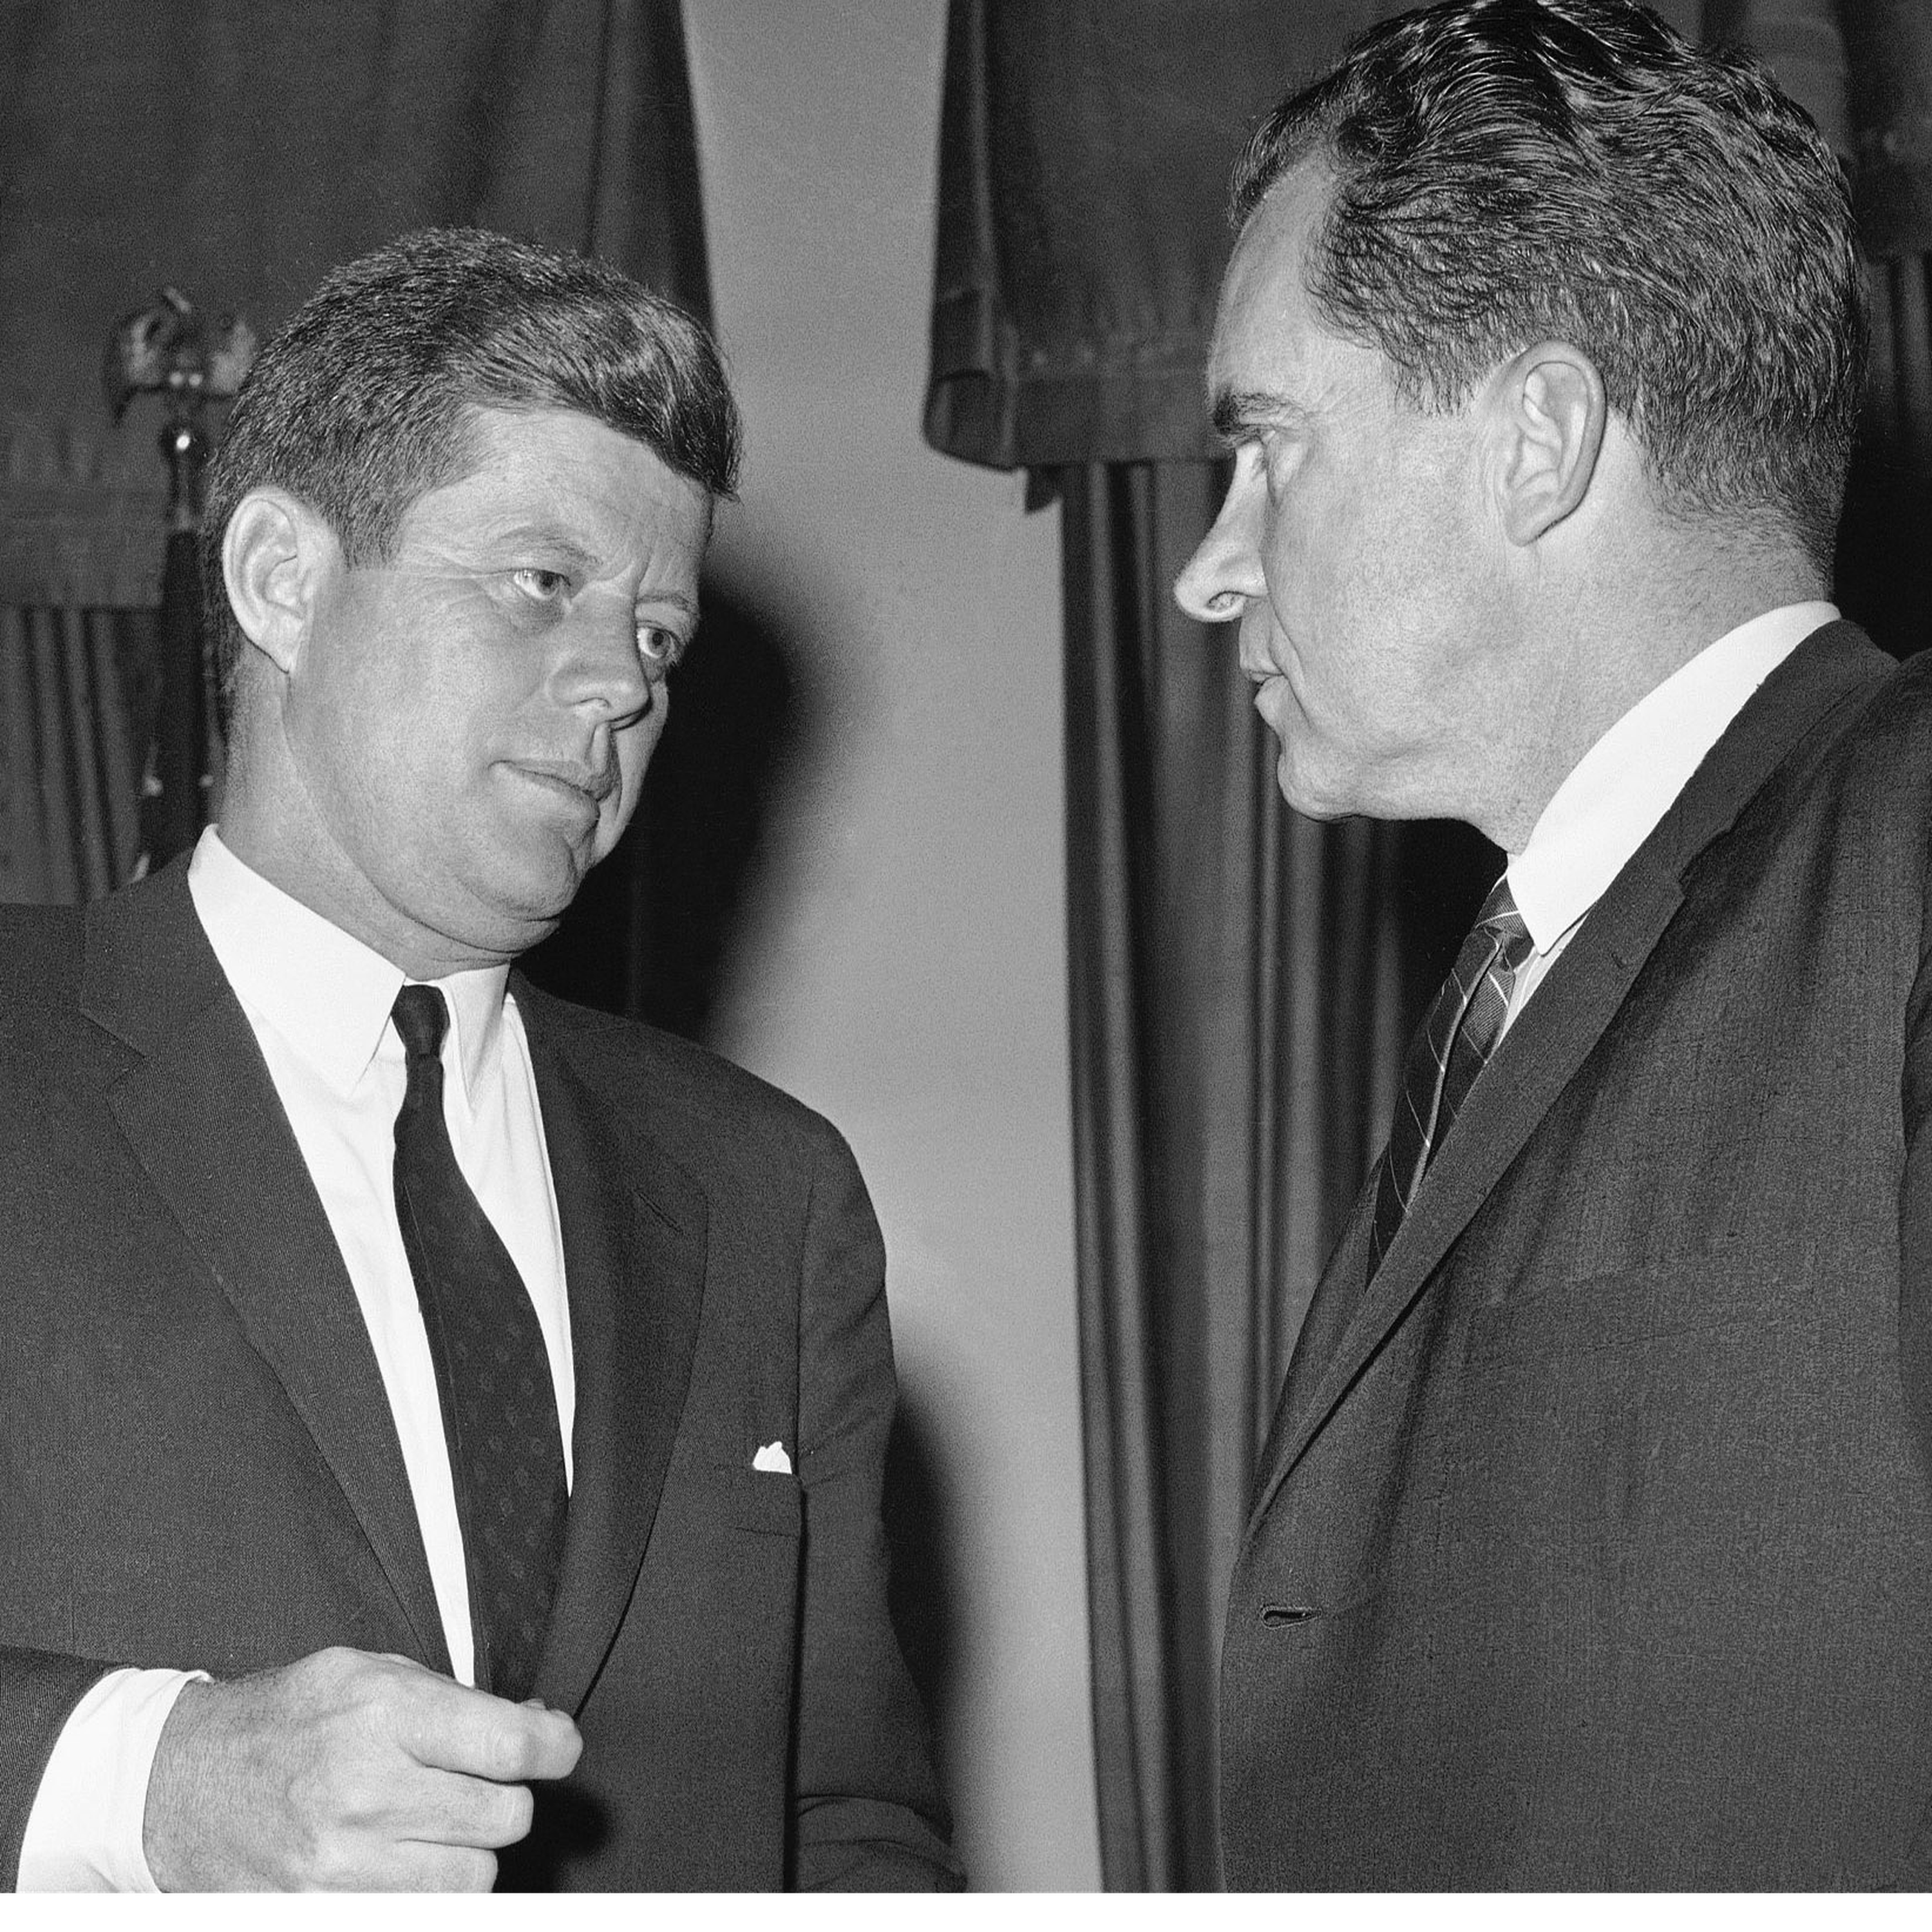 The Election of 1960 - Kennedy vs Nixon part 1